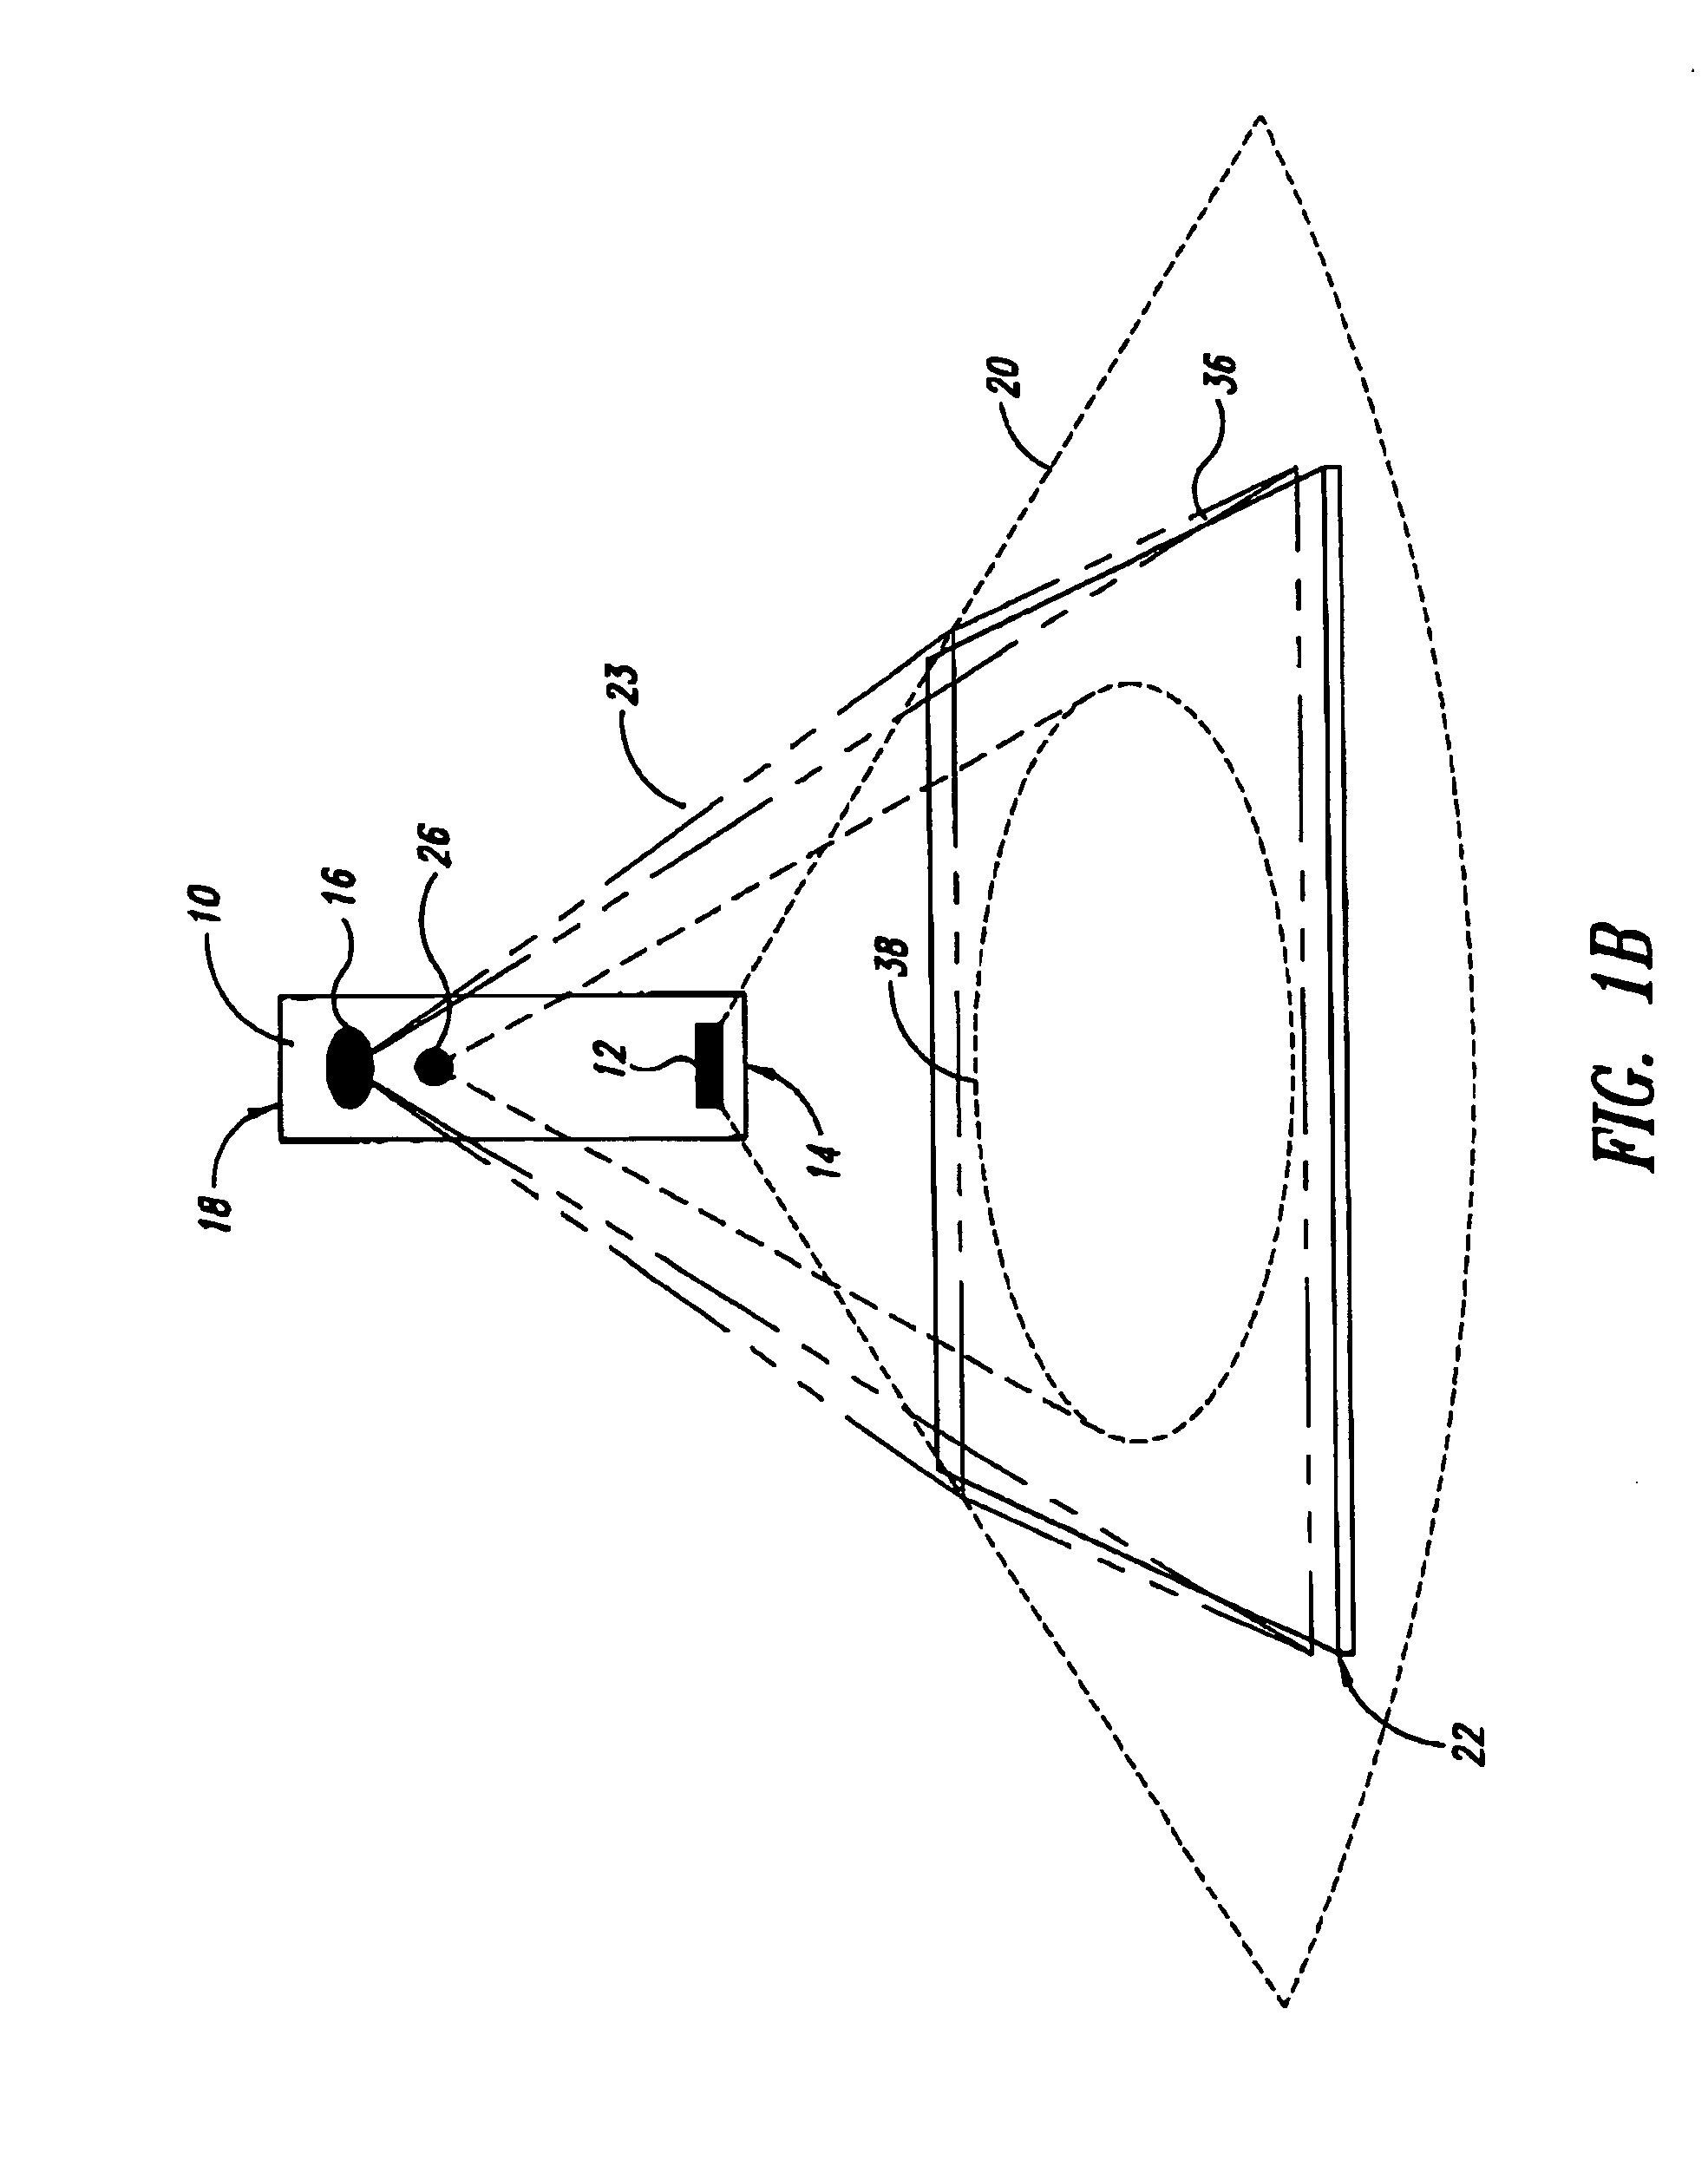 System and method for a virtual multi-touch mouse and stylus apparatus